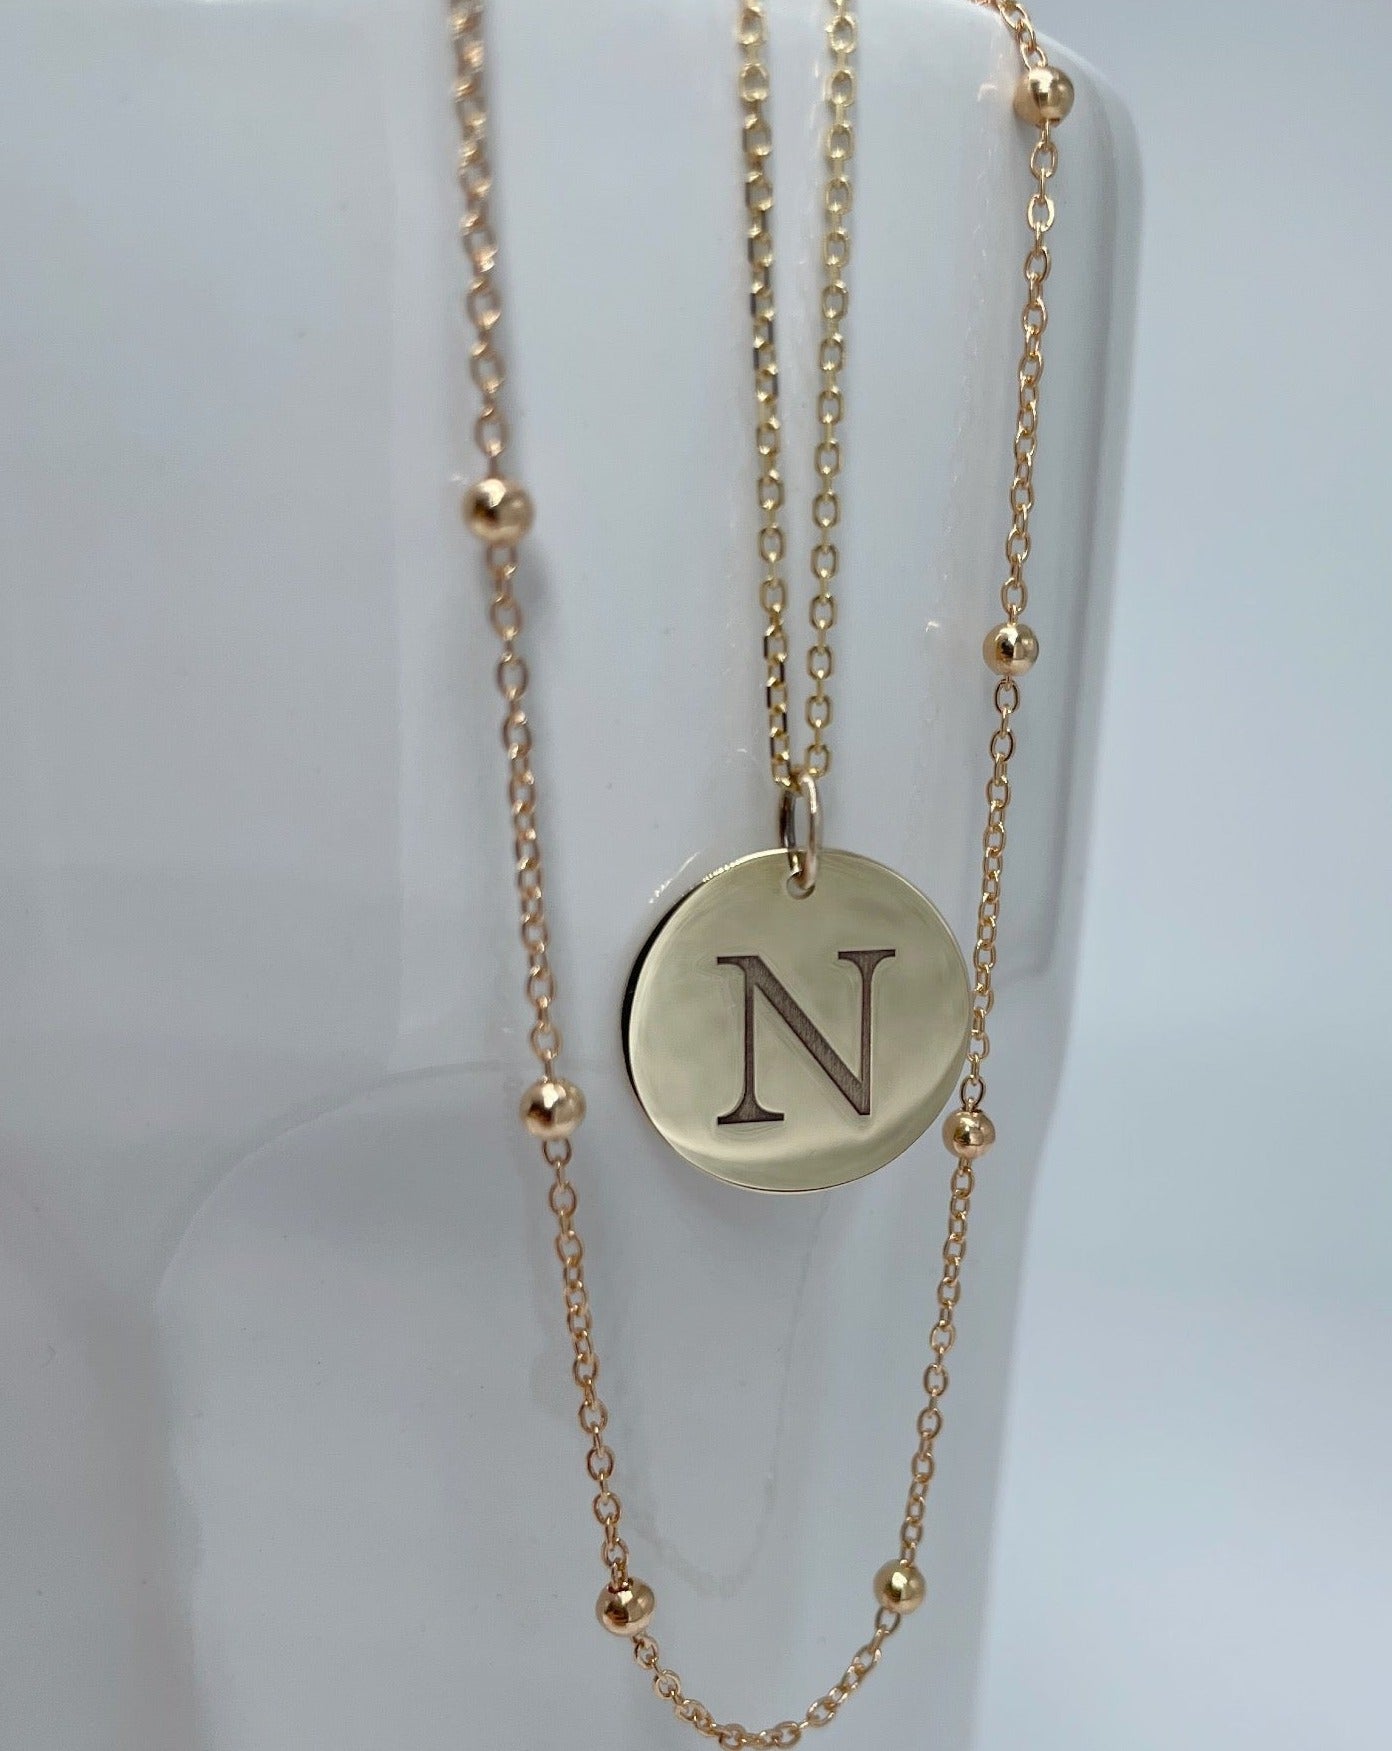 Two 9kt gold necklaces from Collective & Co online jewellery store